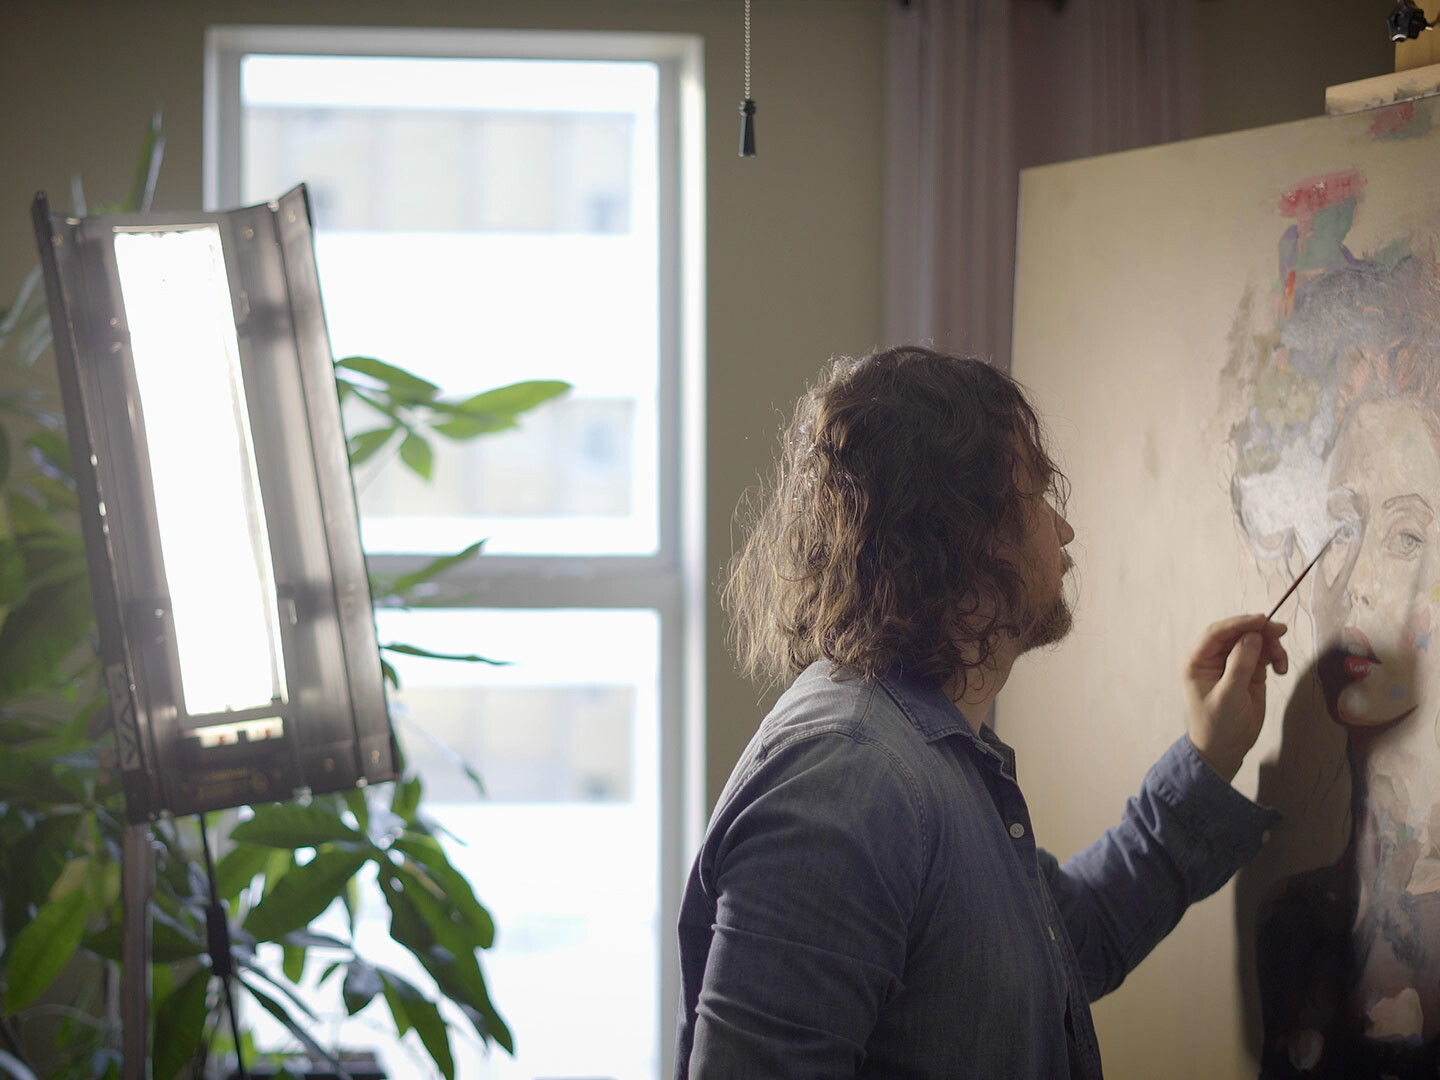 Artist at work on a painting of a woman's face, reminiscent of the Mona Lisa, in a sunlit studio.